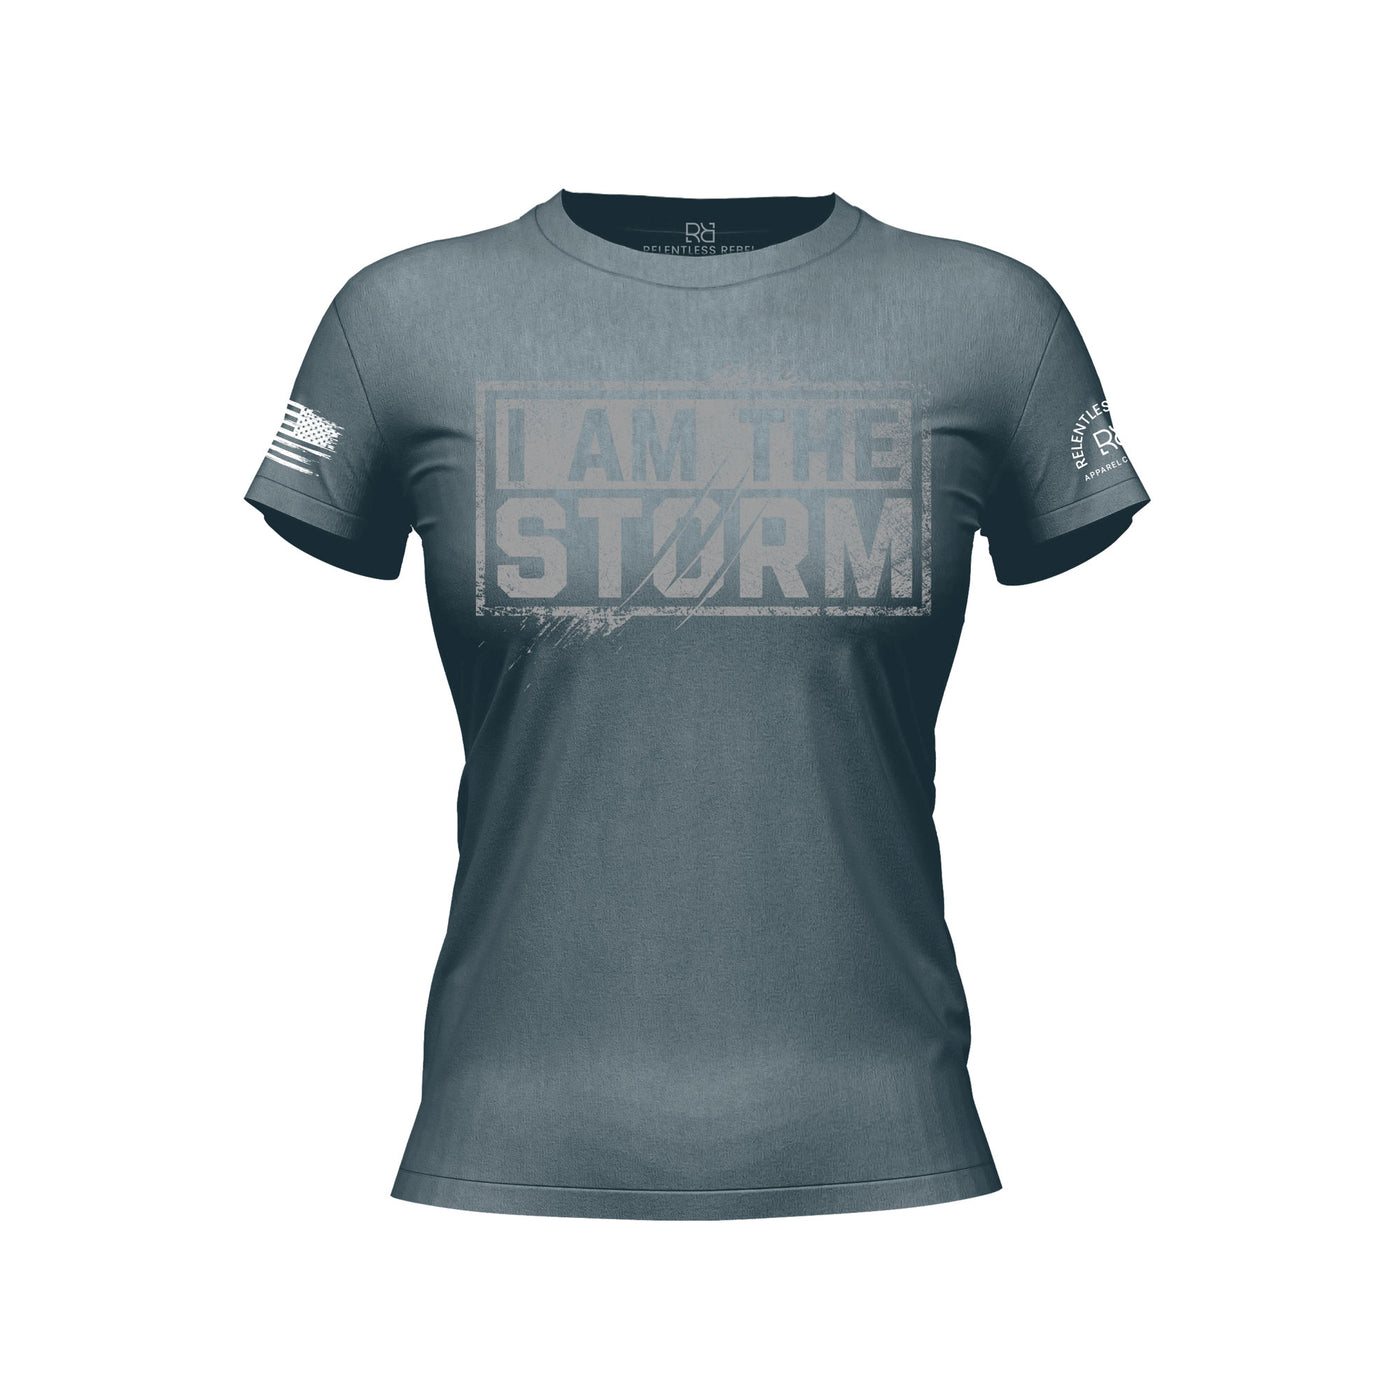 Heather Slate Women's I Am The Storm Front Design Tee